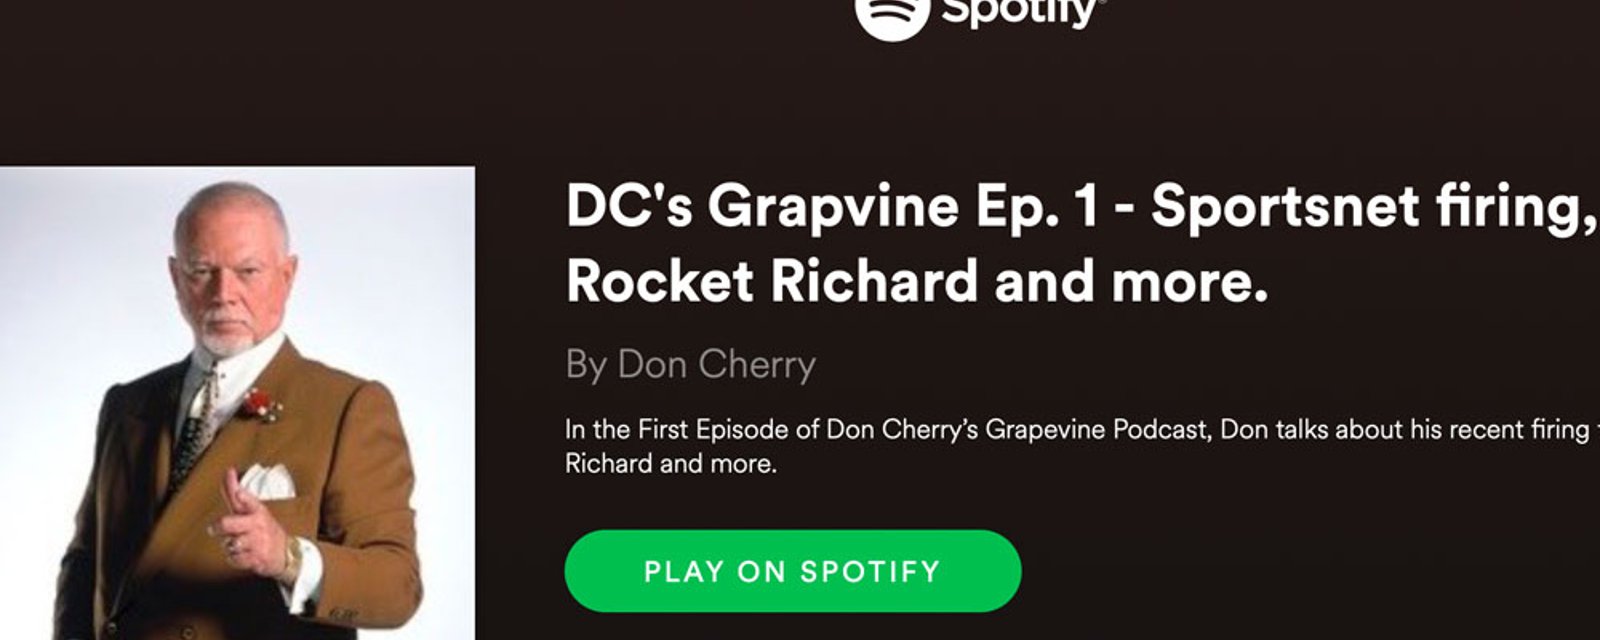 Don Cherry’s Grapevine Podcast is live!